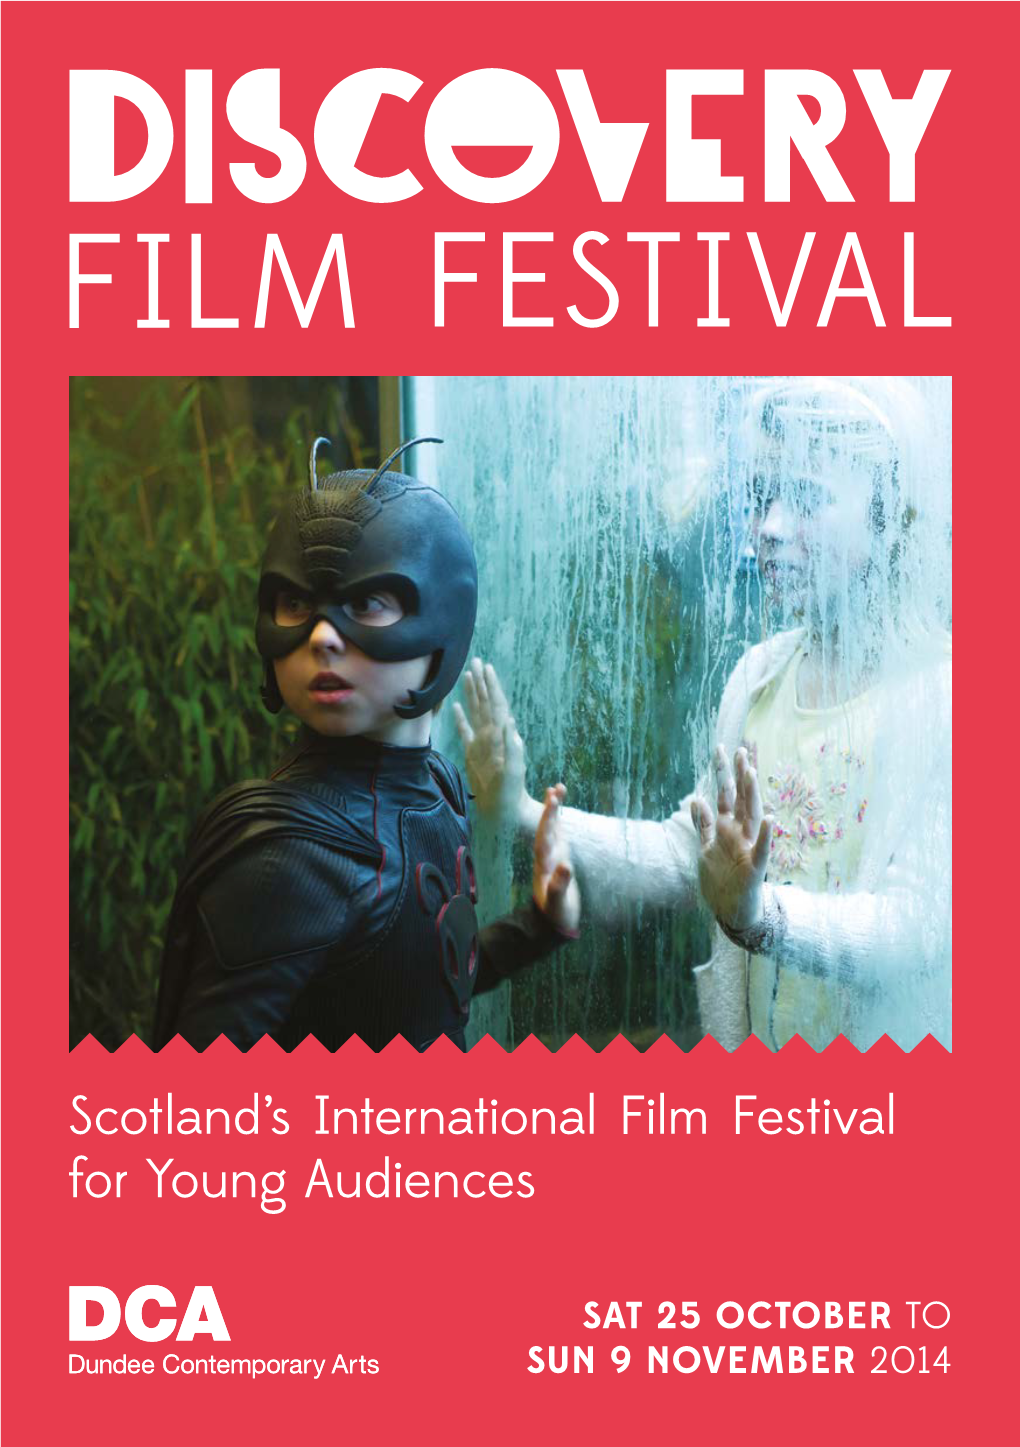 Read the Discovery Film Festival 2014